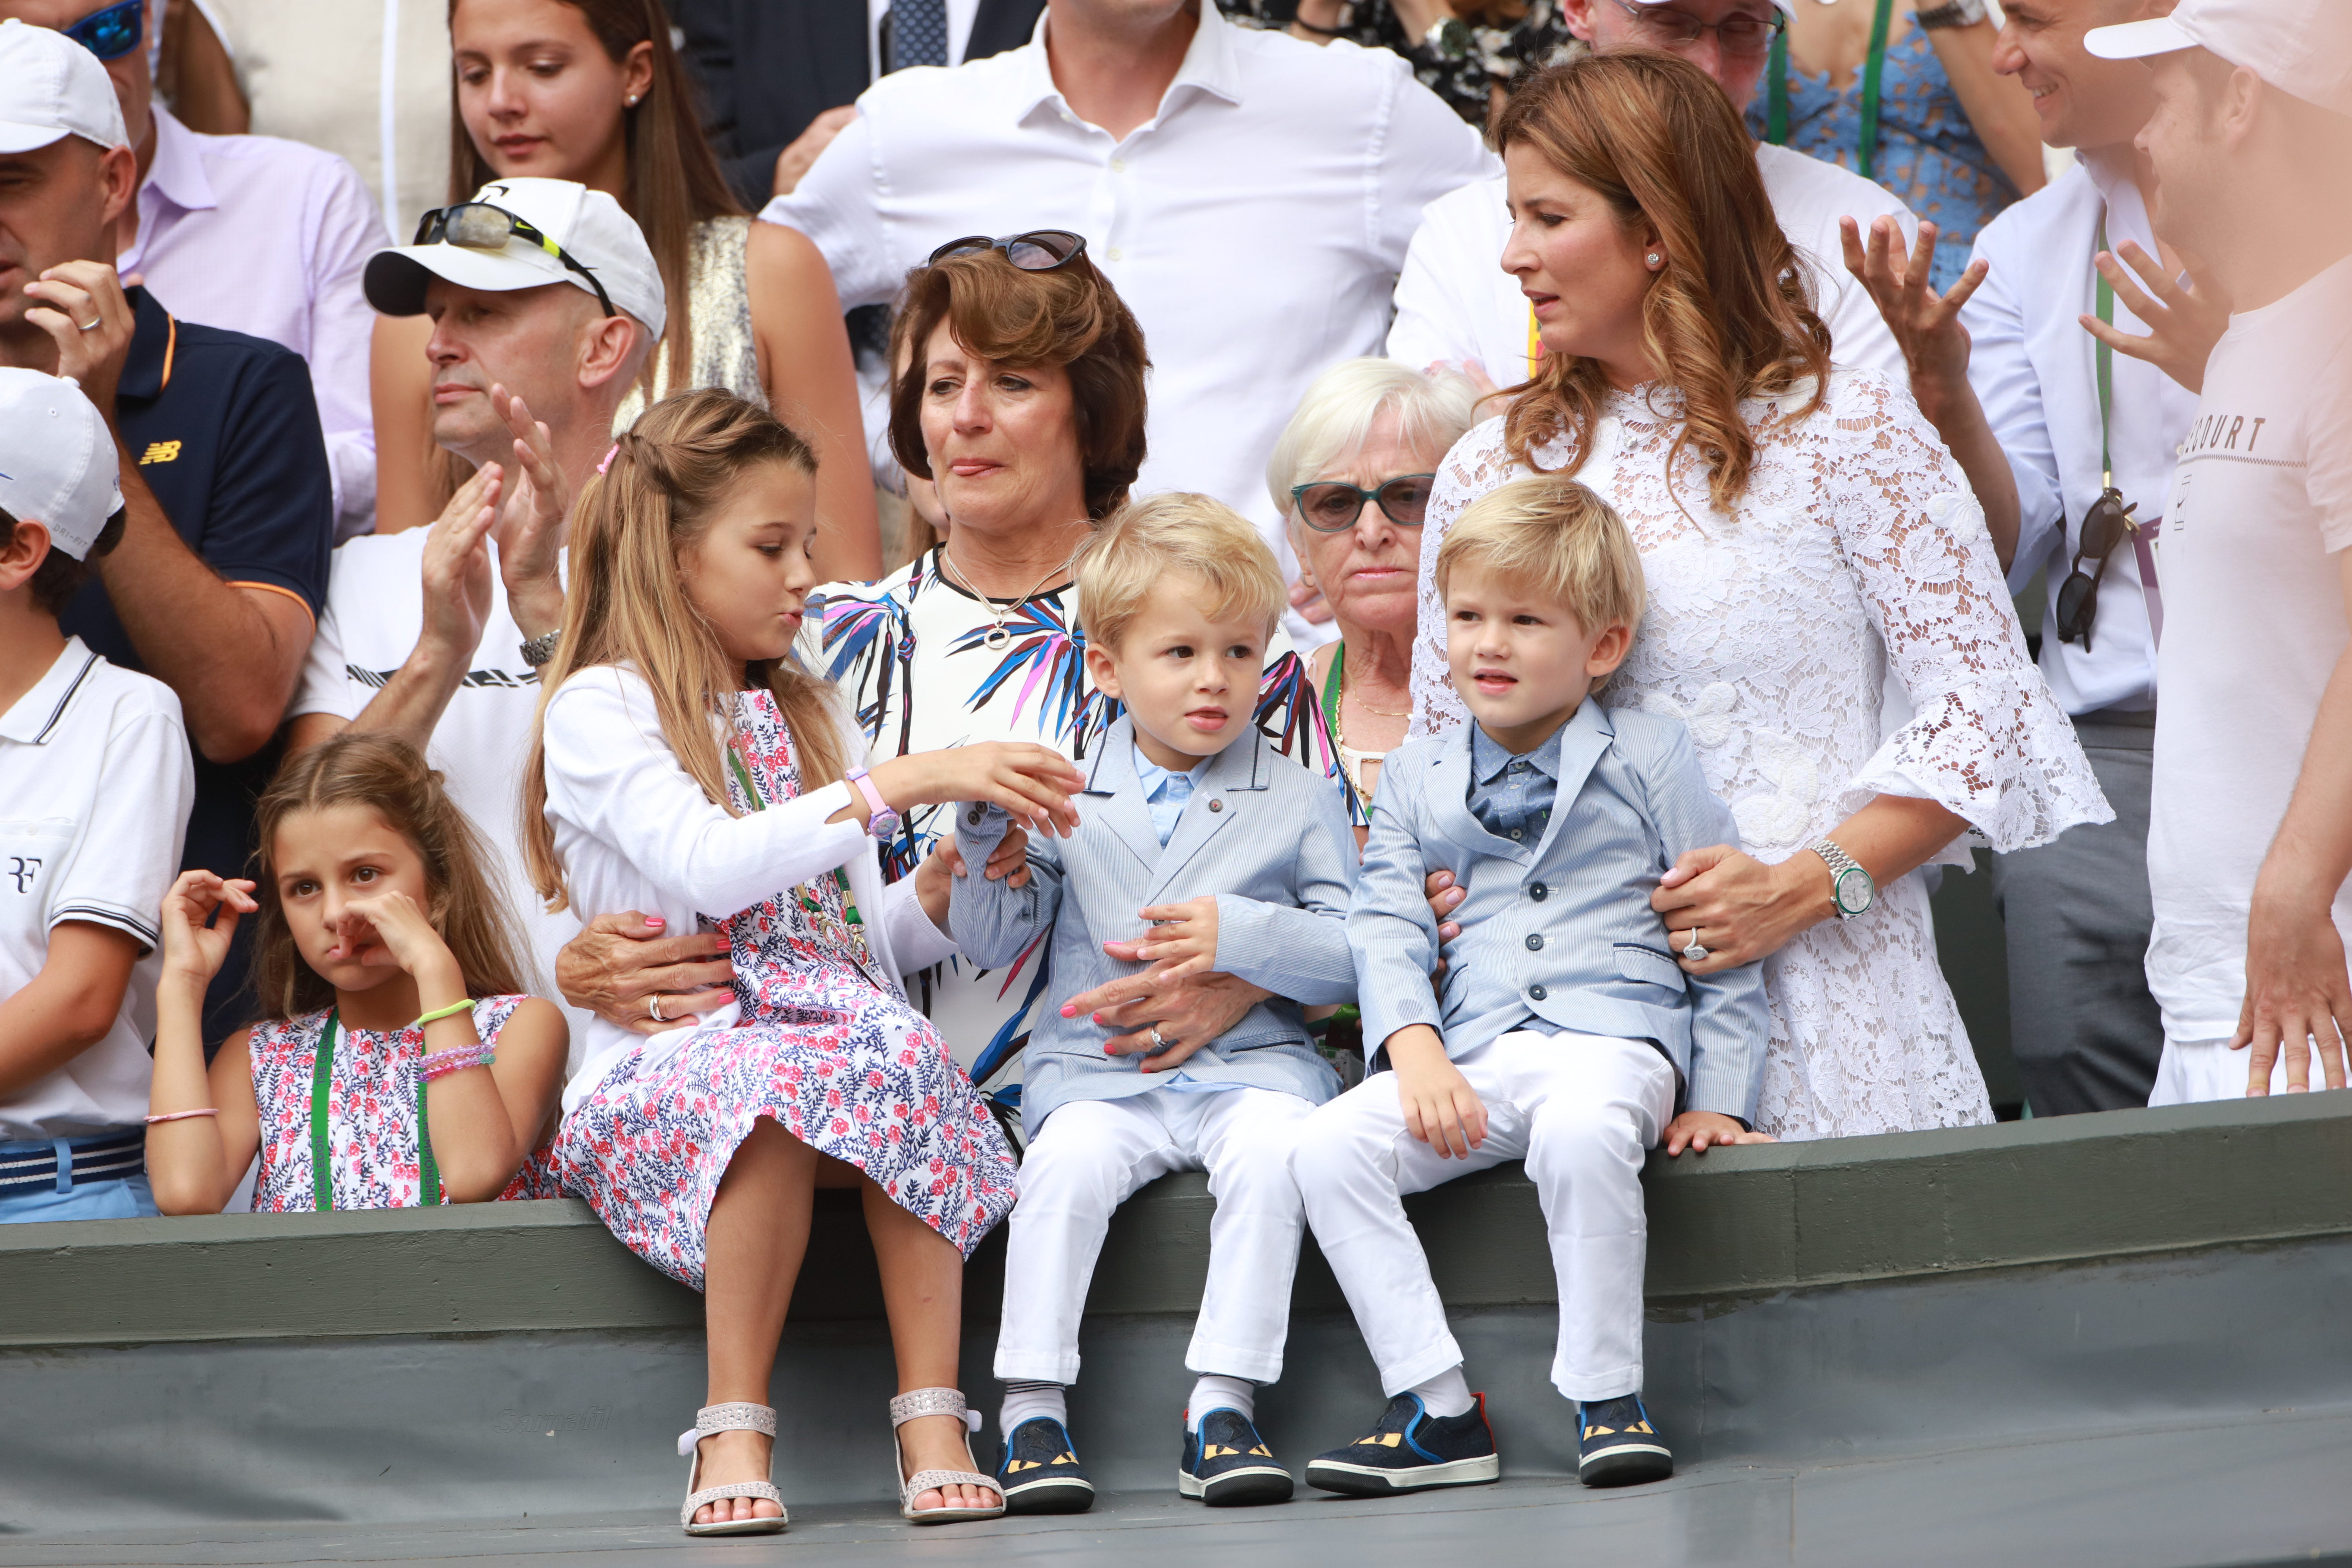 Mirka Federer with her twin daughters Myla Rose and Charlene Riva and twin sons Leo and Lennert, at the Wimbledon Lawn Tennis Championships on July 16, 2017, in London, England. | Source: Getty Images